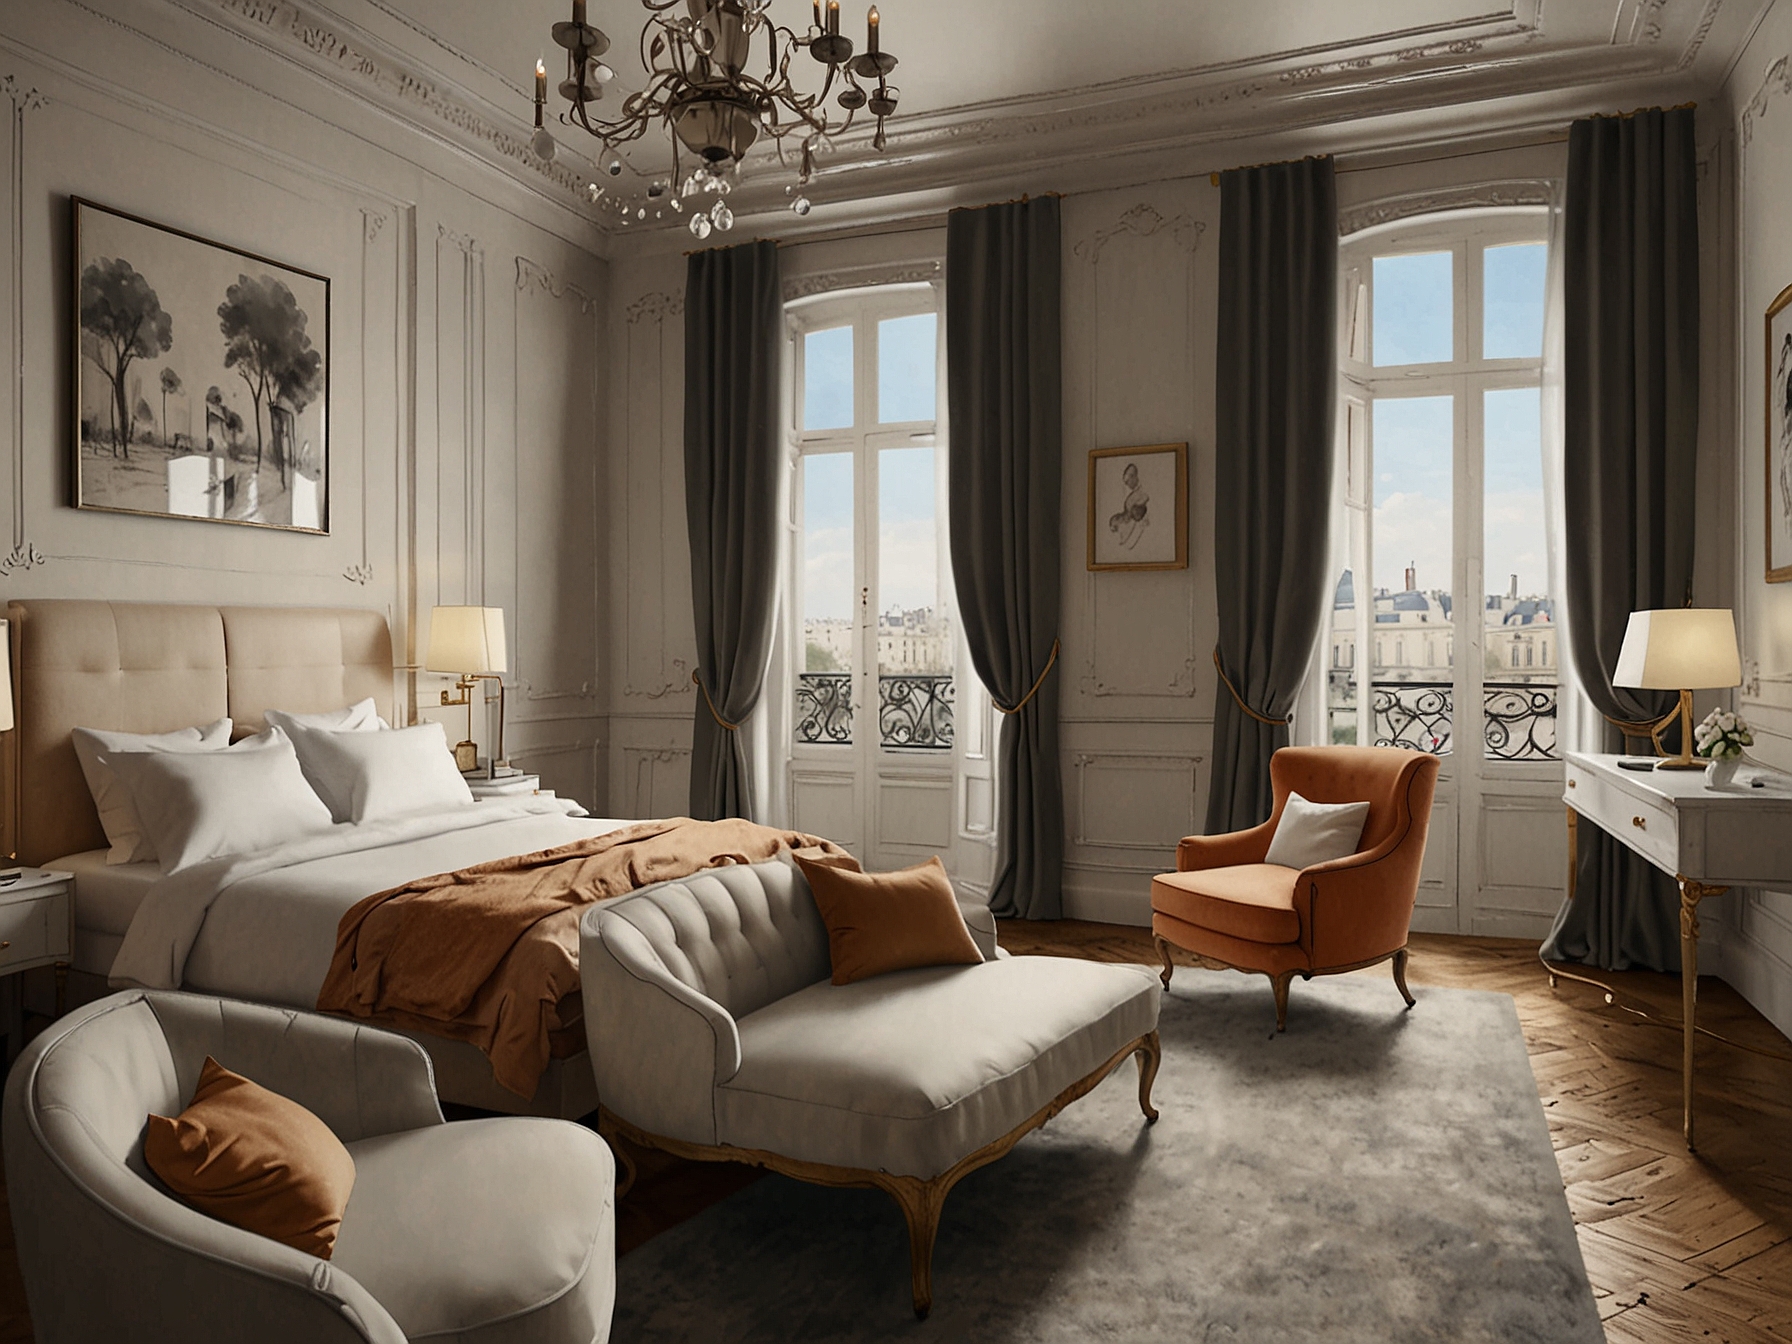 A chic Parisian hotel suite showcasing separate sleeping areas for parents and children, blending classic Parisian architecture with contemporary décor. Perfect for family comfort and privacy.